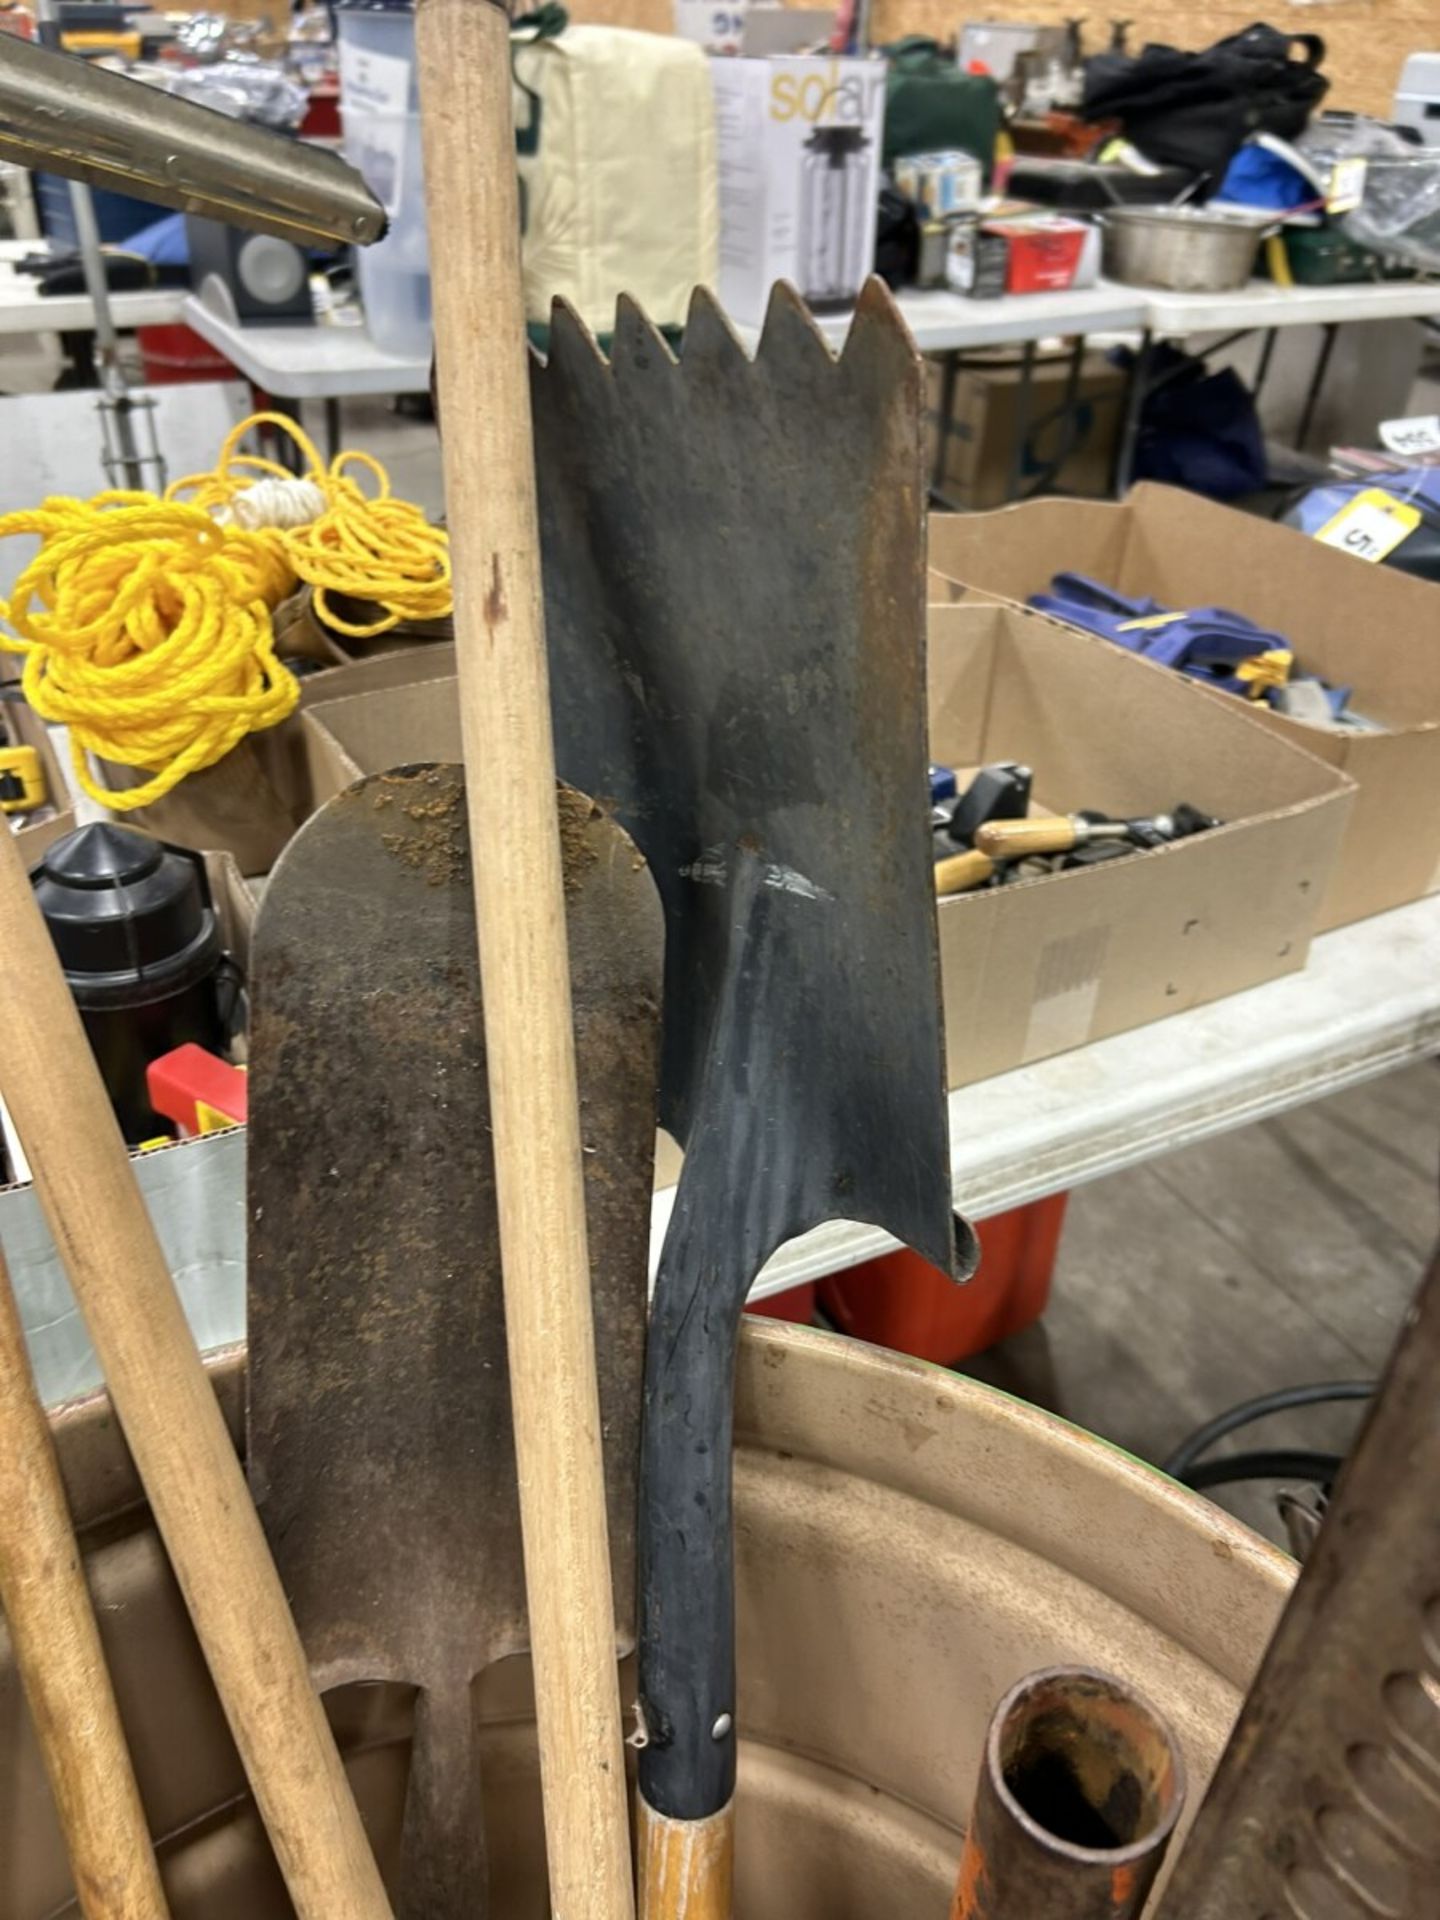 EDGING SHOVEL, 48" JACK ALL, SQUEEGEE, BROOMS, ETC. - Image 3 of 5